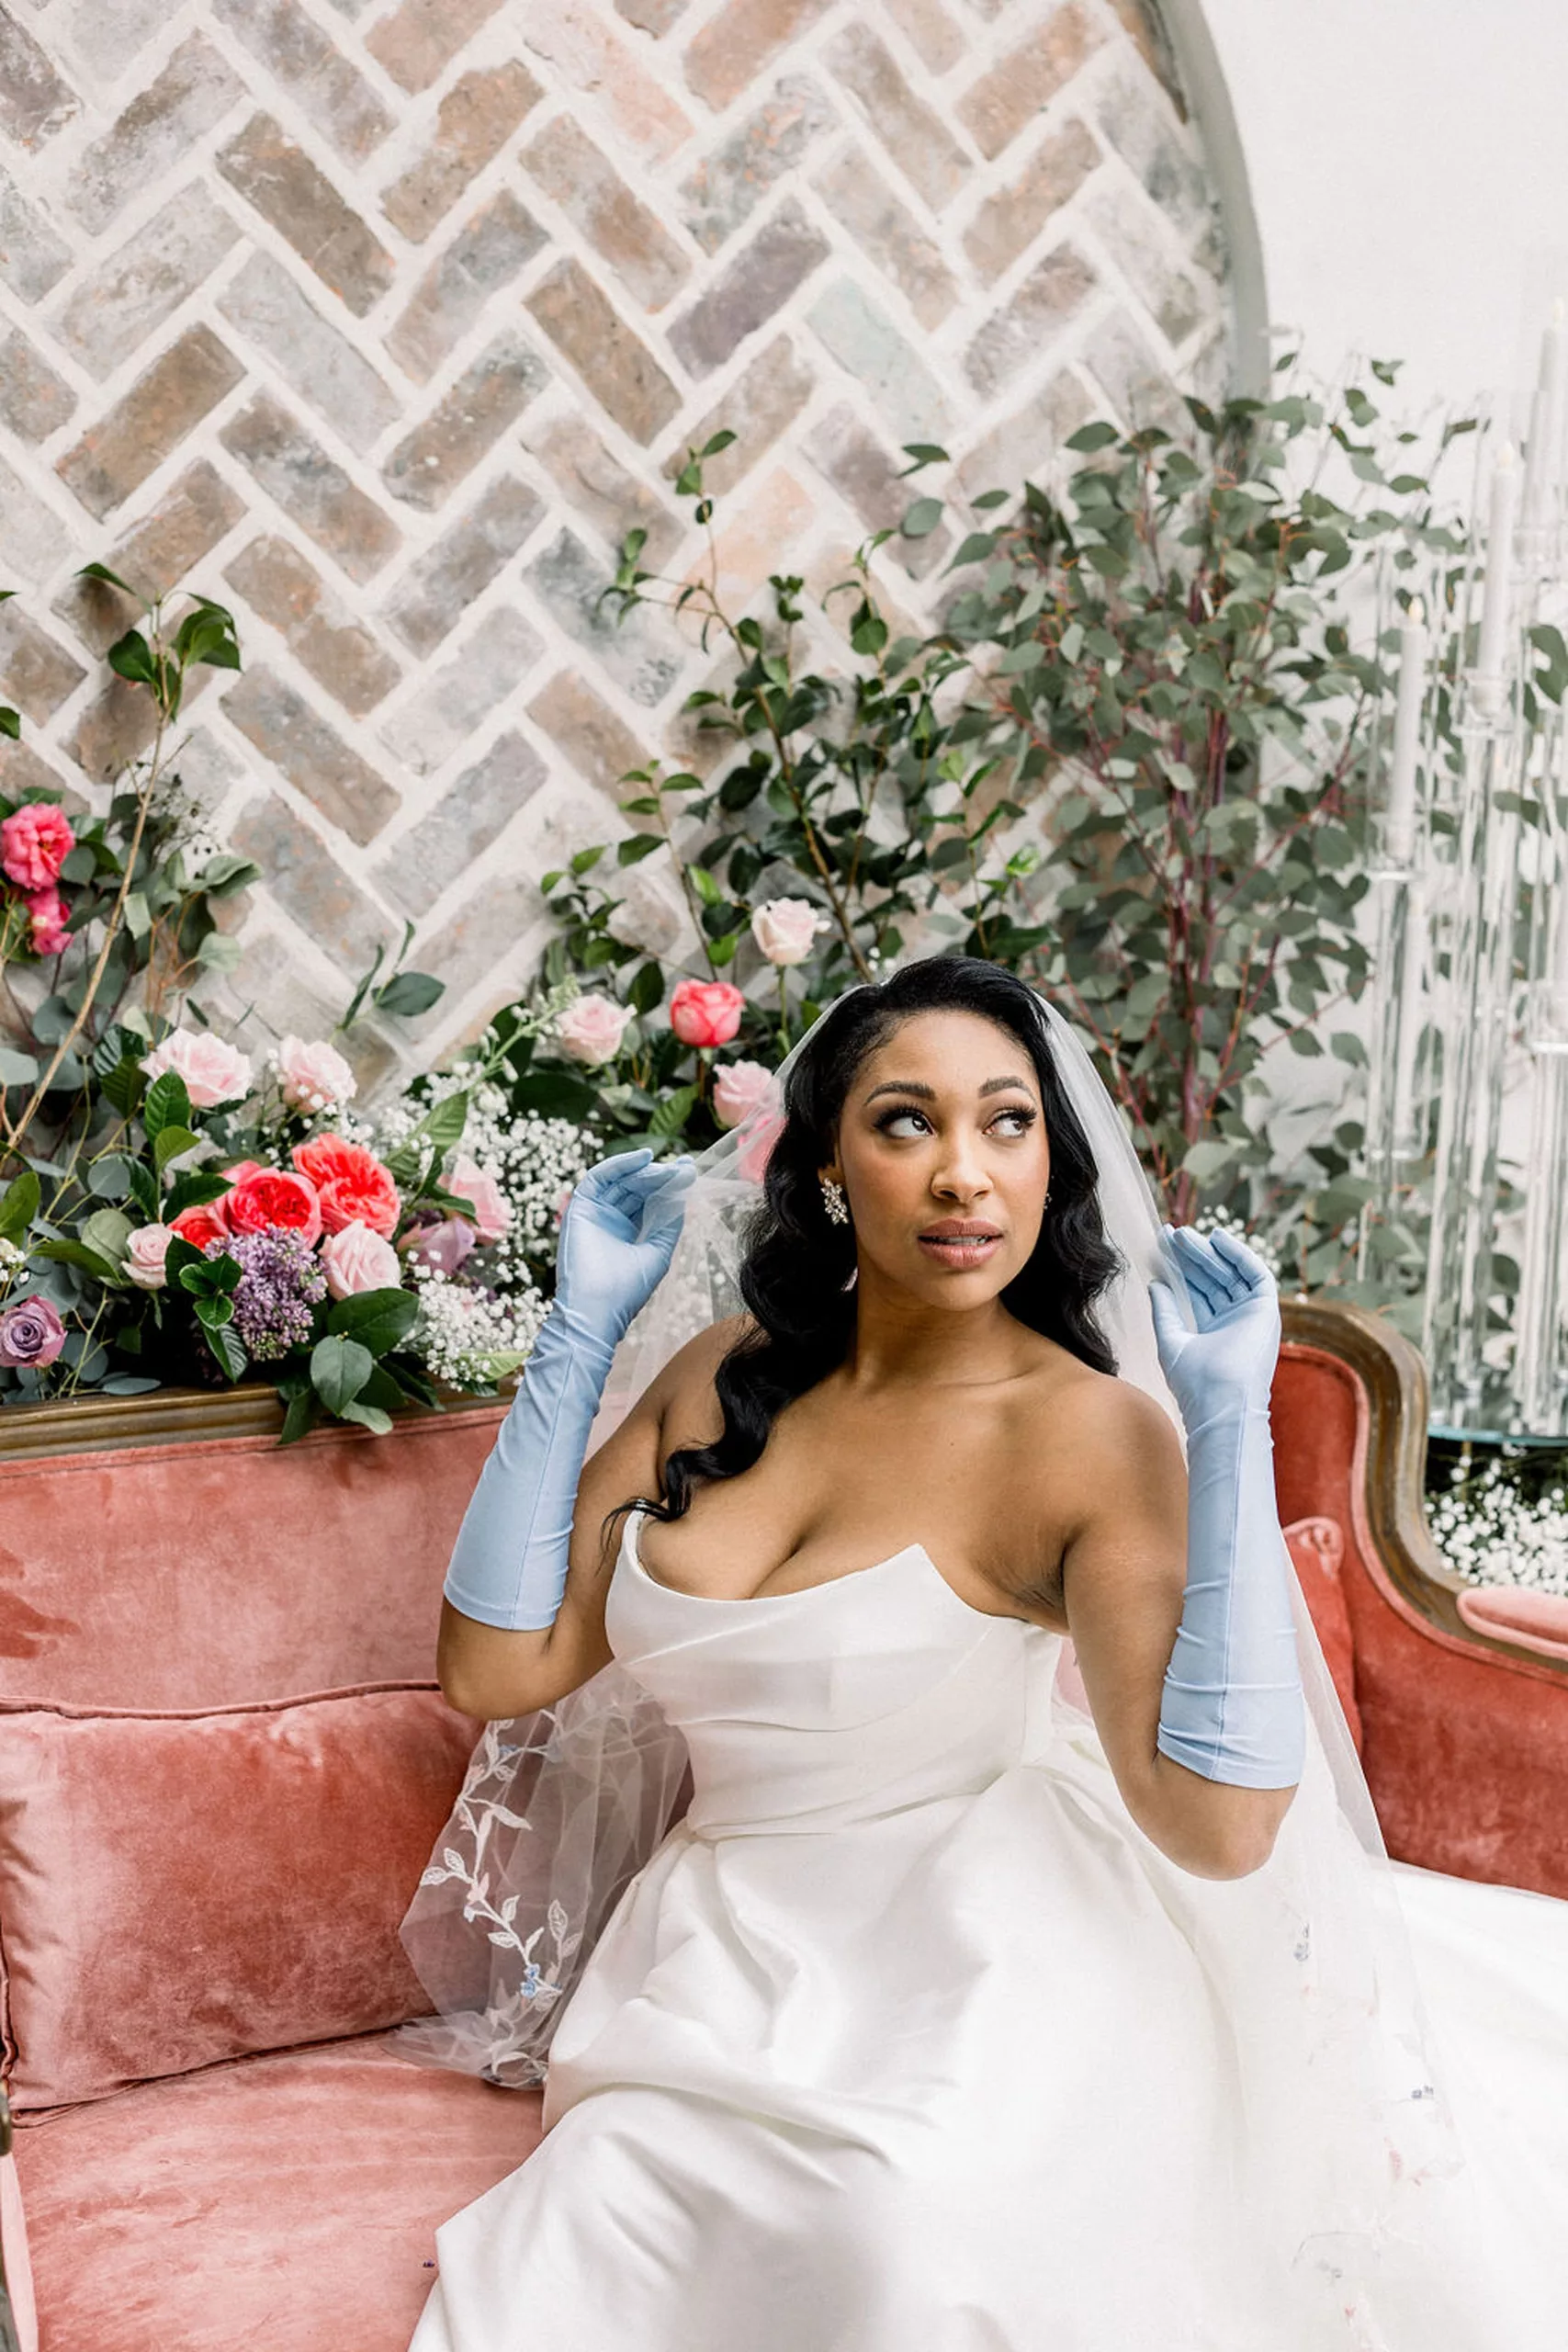 A bride plays with her veil while wearing blue gloves while sitting on a pink couch surrounded by flowers